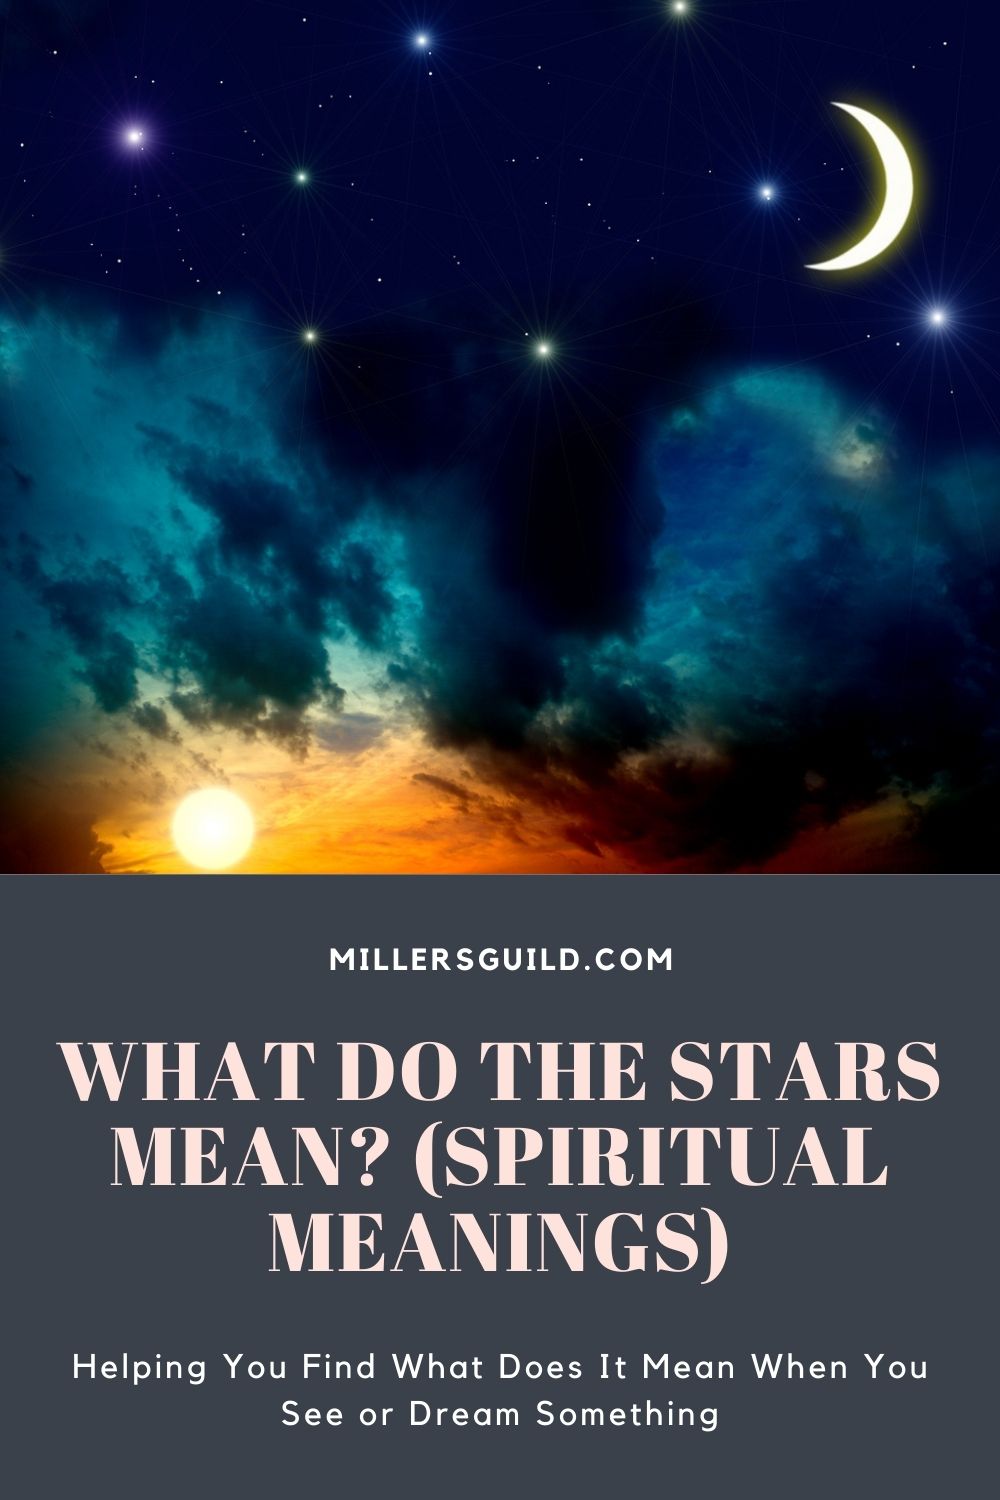 What Do the Stars Mean (Spiritual Meanings) 2